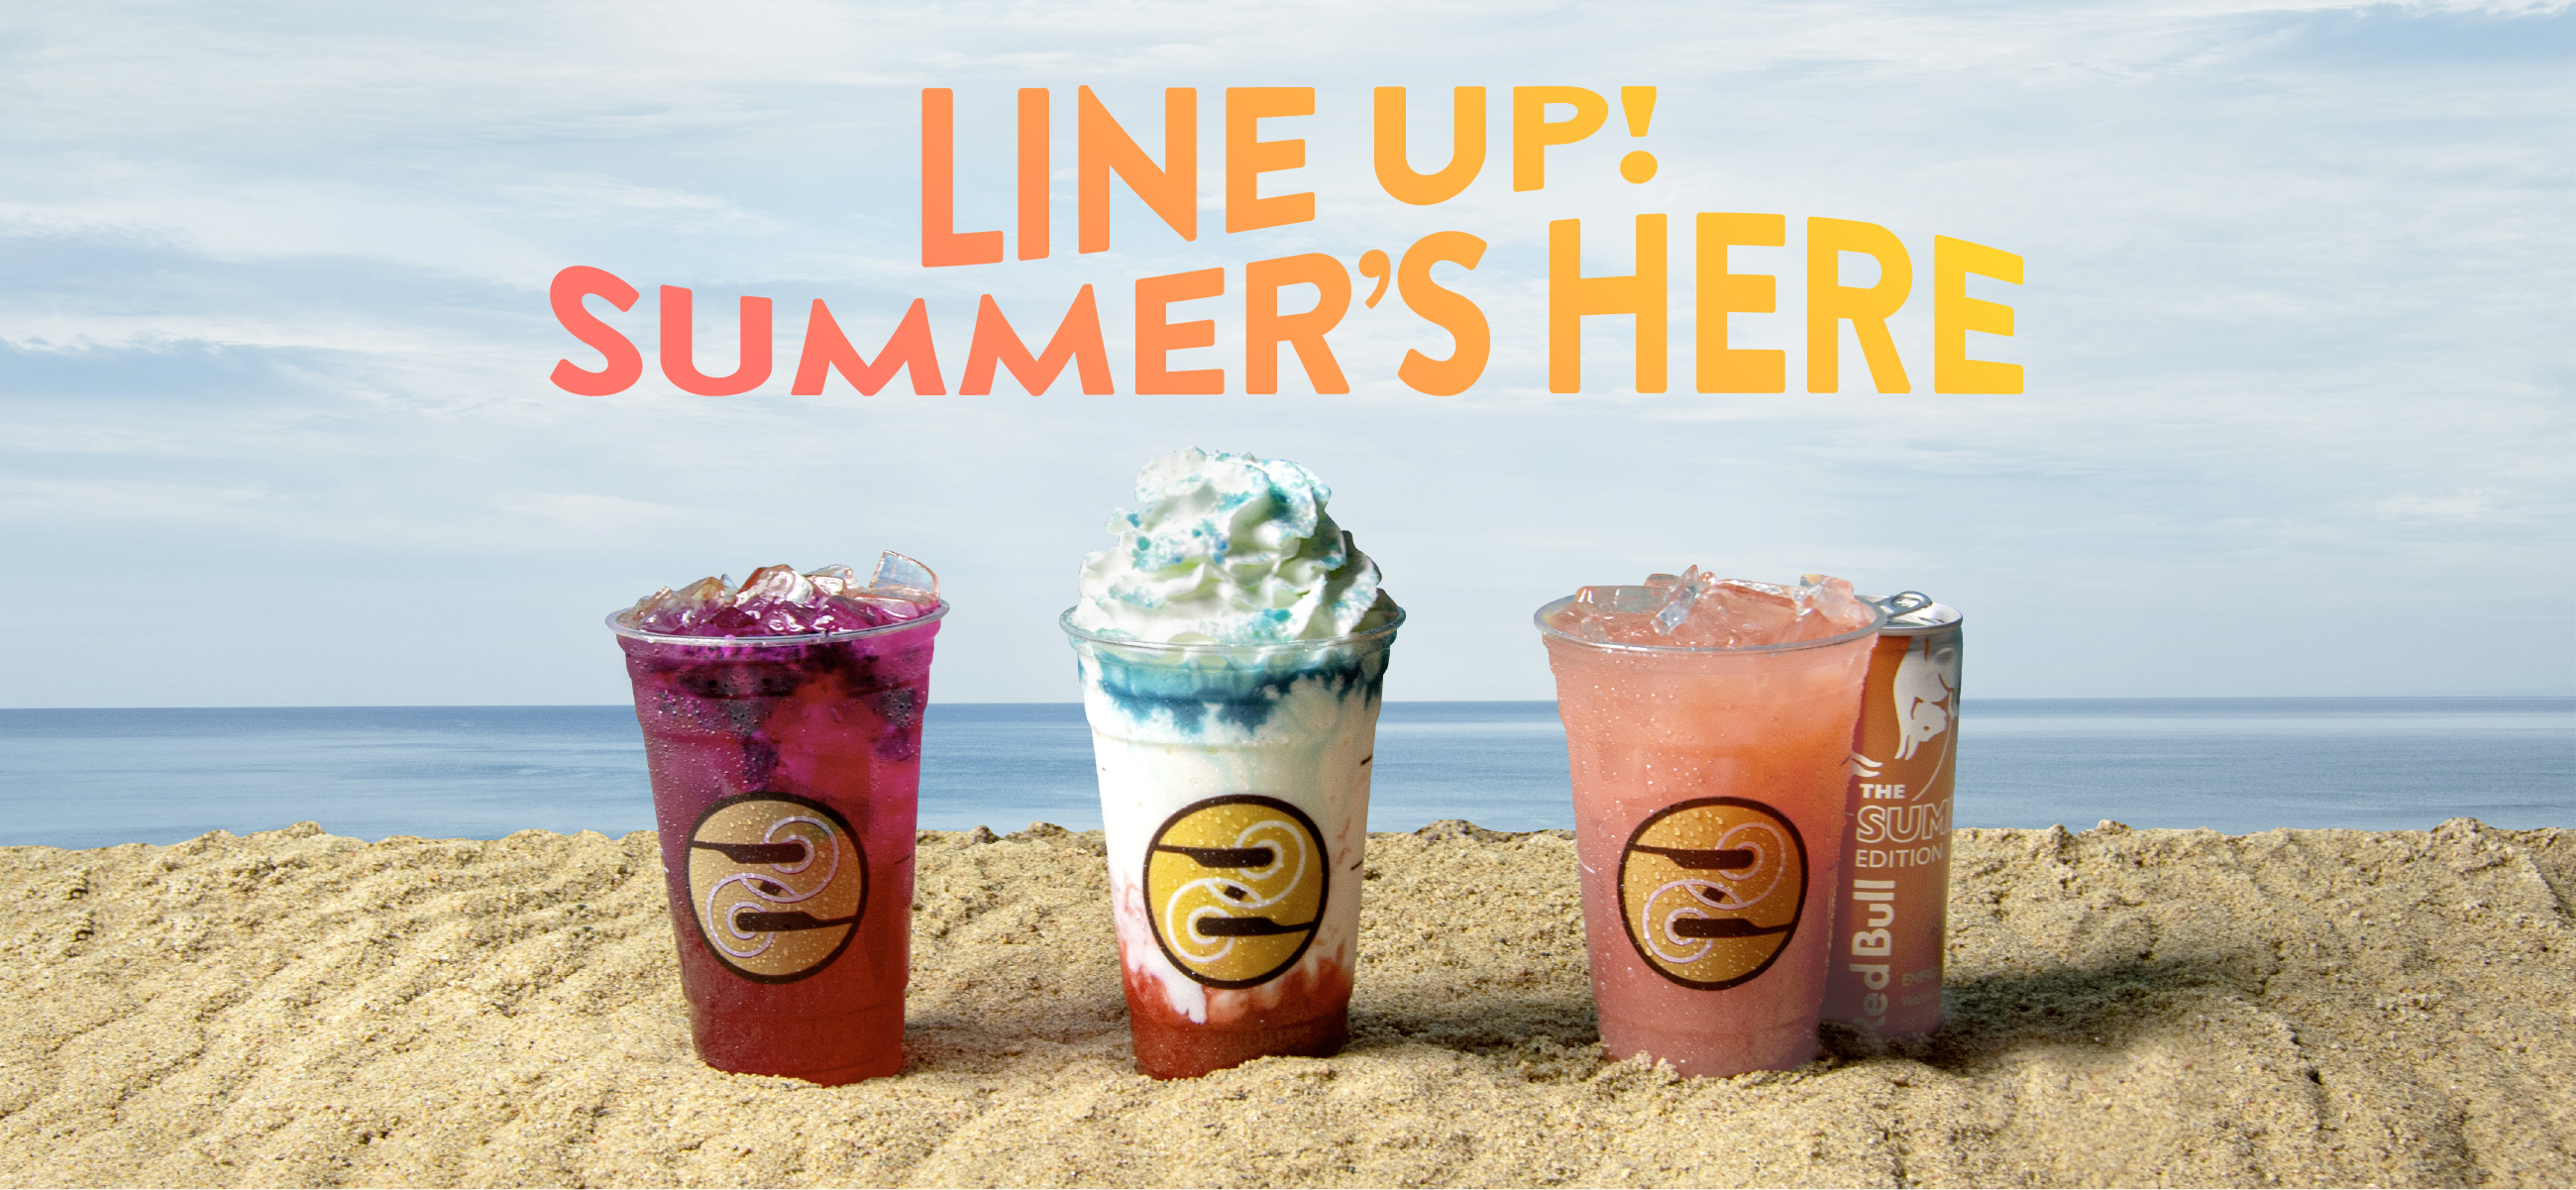 The Ultimate Summer Lineup Has Arrived at Ziggi’s Coffee